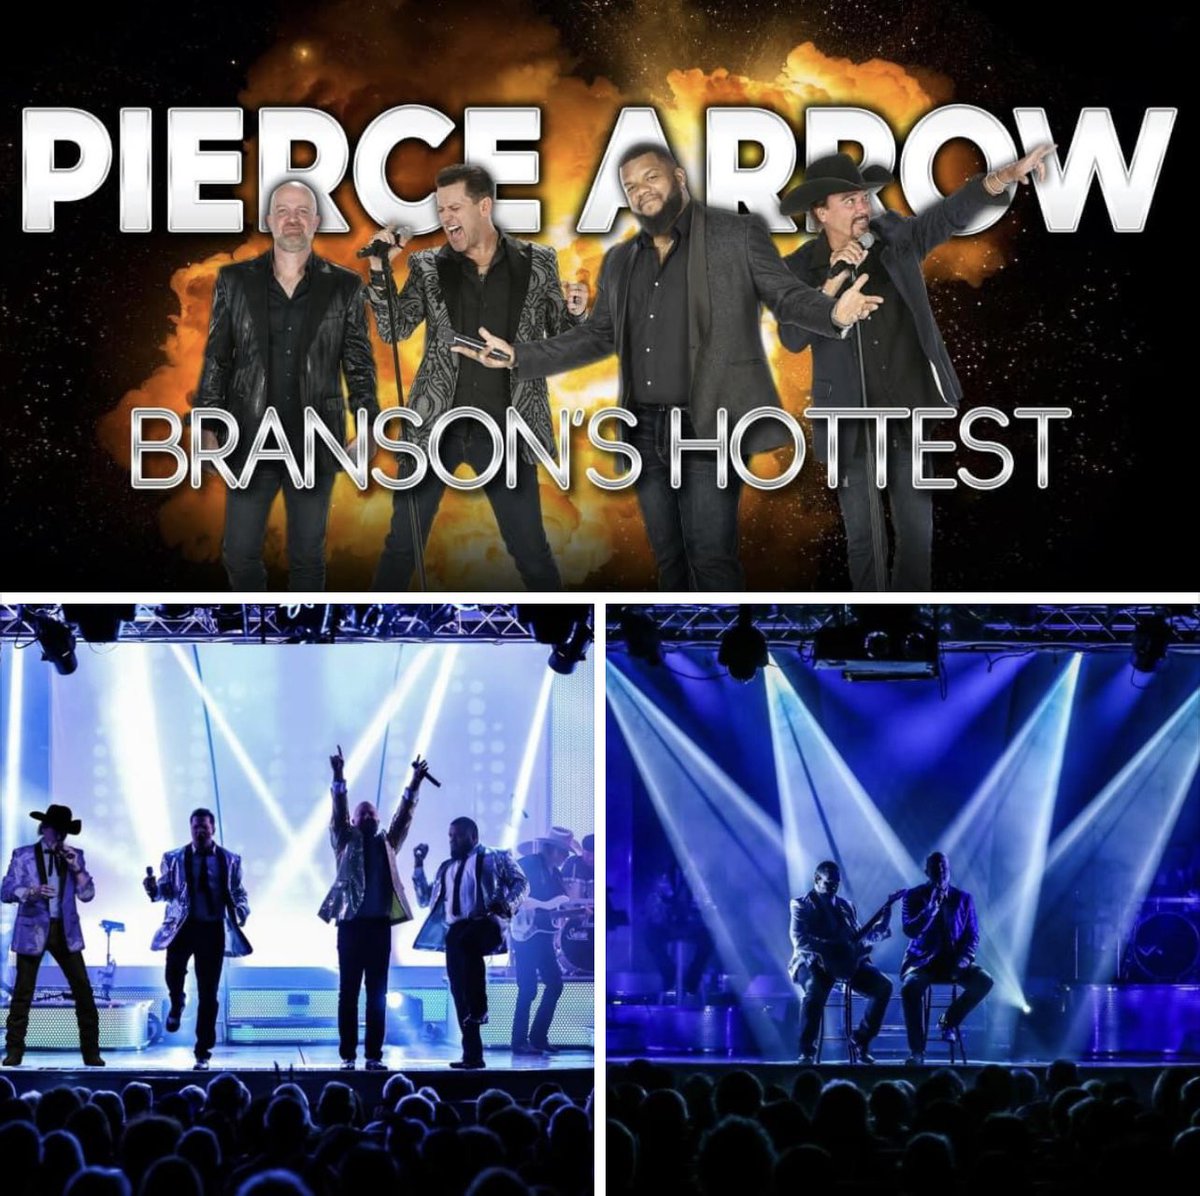 #Branson’s #Hottest #Quartert #piercearrow #Country #Decades #Comedy @piercearrowshow @ExploreBranson @VisitMO #vacations #LiveMusic #Book #Today @StayontheStrip #FREE #StayontheStrip #merchandise #swag #hotel #package #combo #2for1 #buyonegetone #Ozarks #comedian of the year